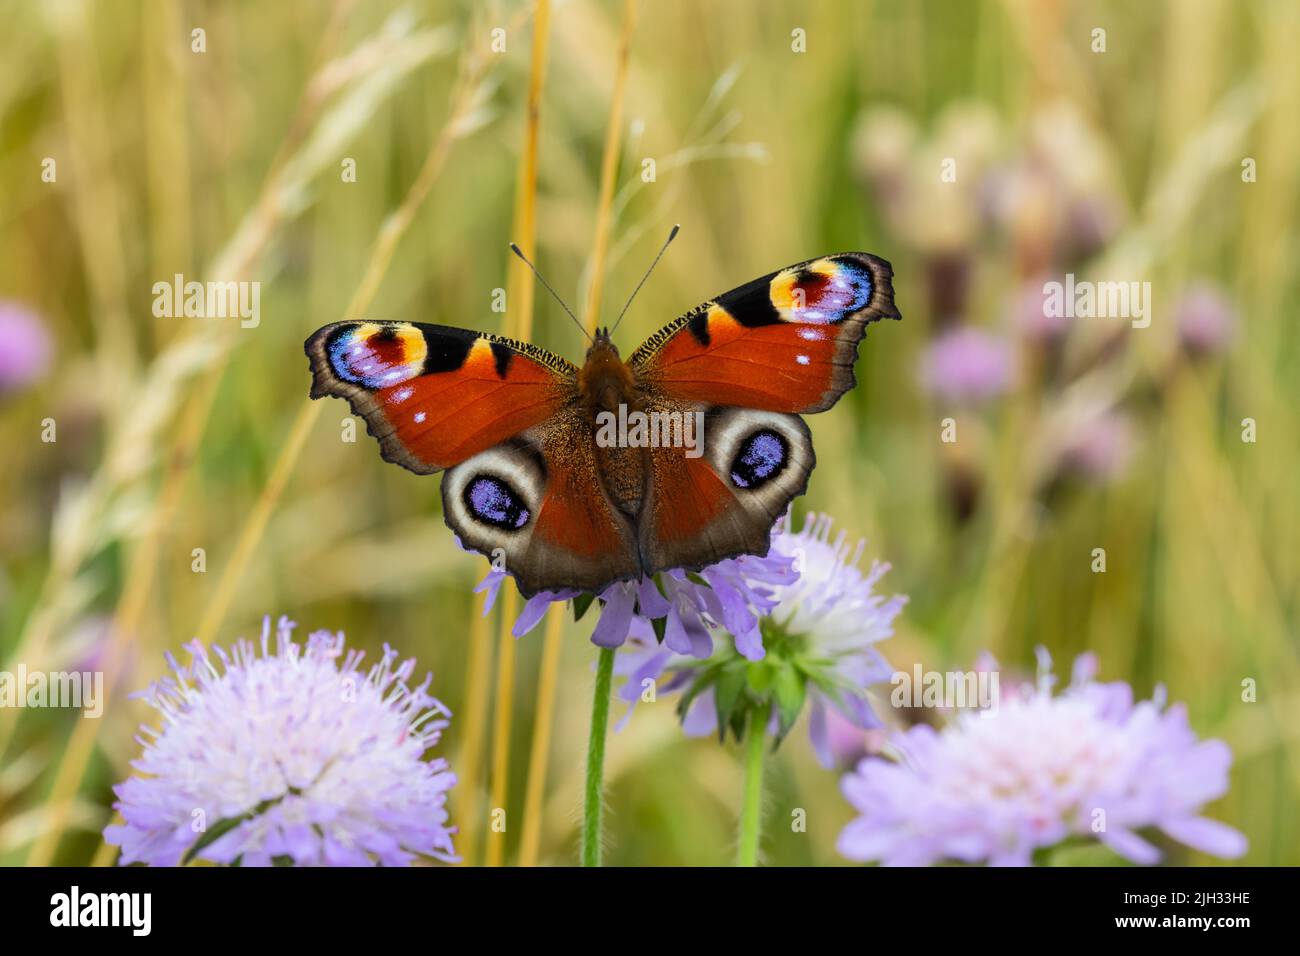 Aglais io, the European peacock, more commonly known simply as the peacock butterfly, perching on a field scabious flower. Stock Photo